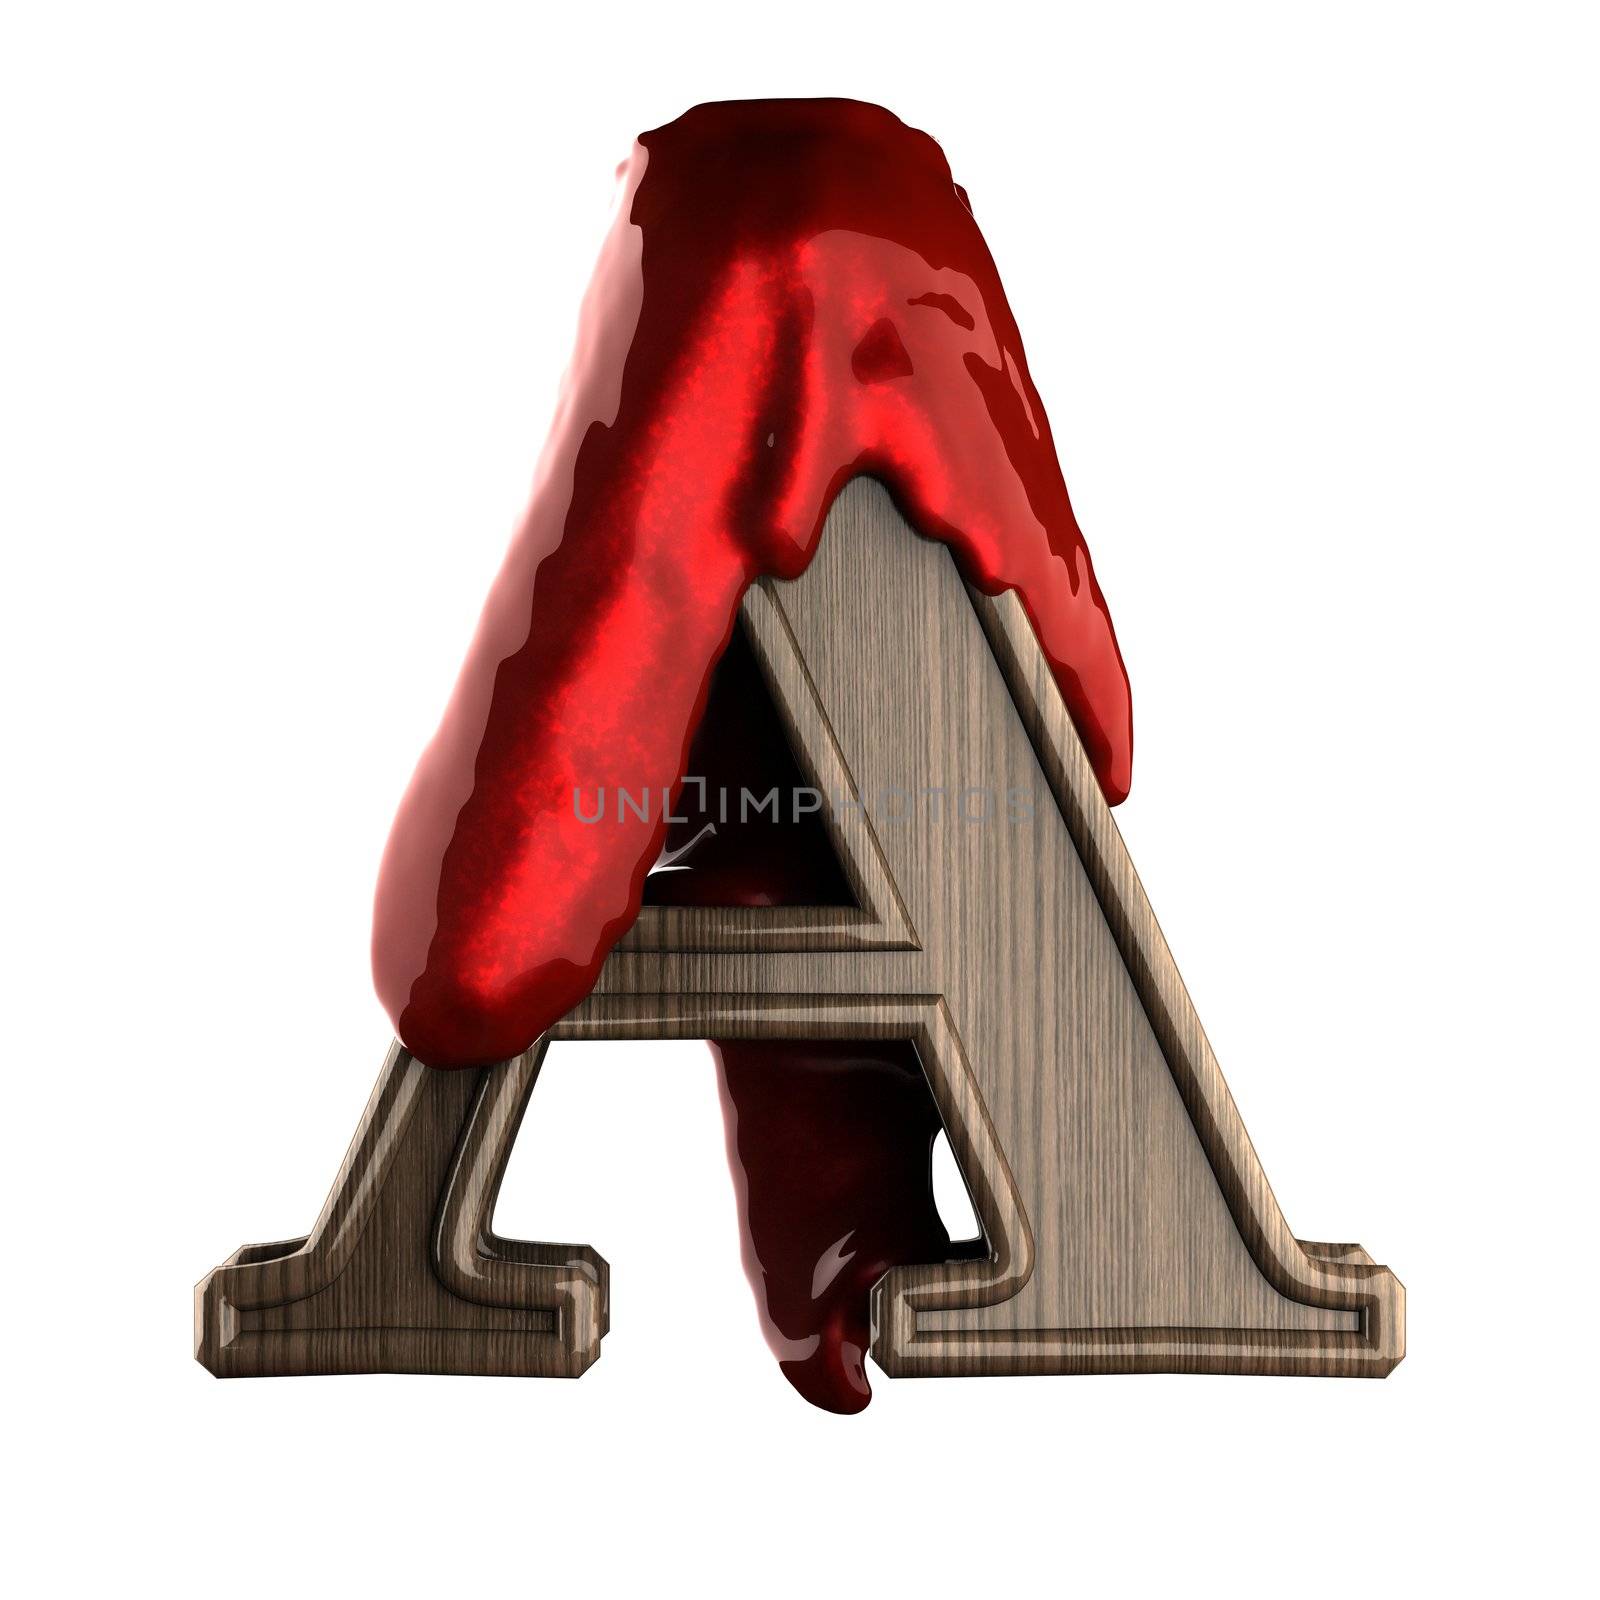 Wooden figure with blood made in 3D